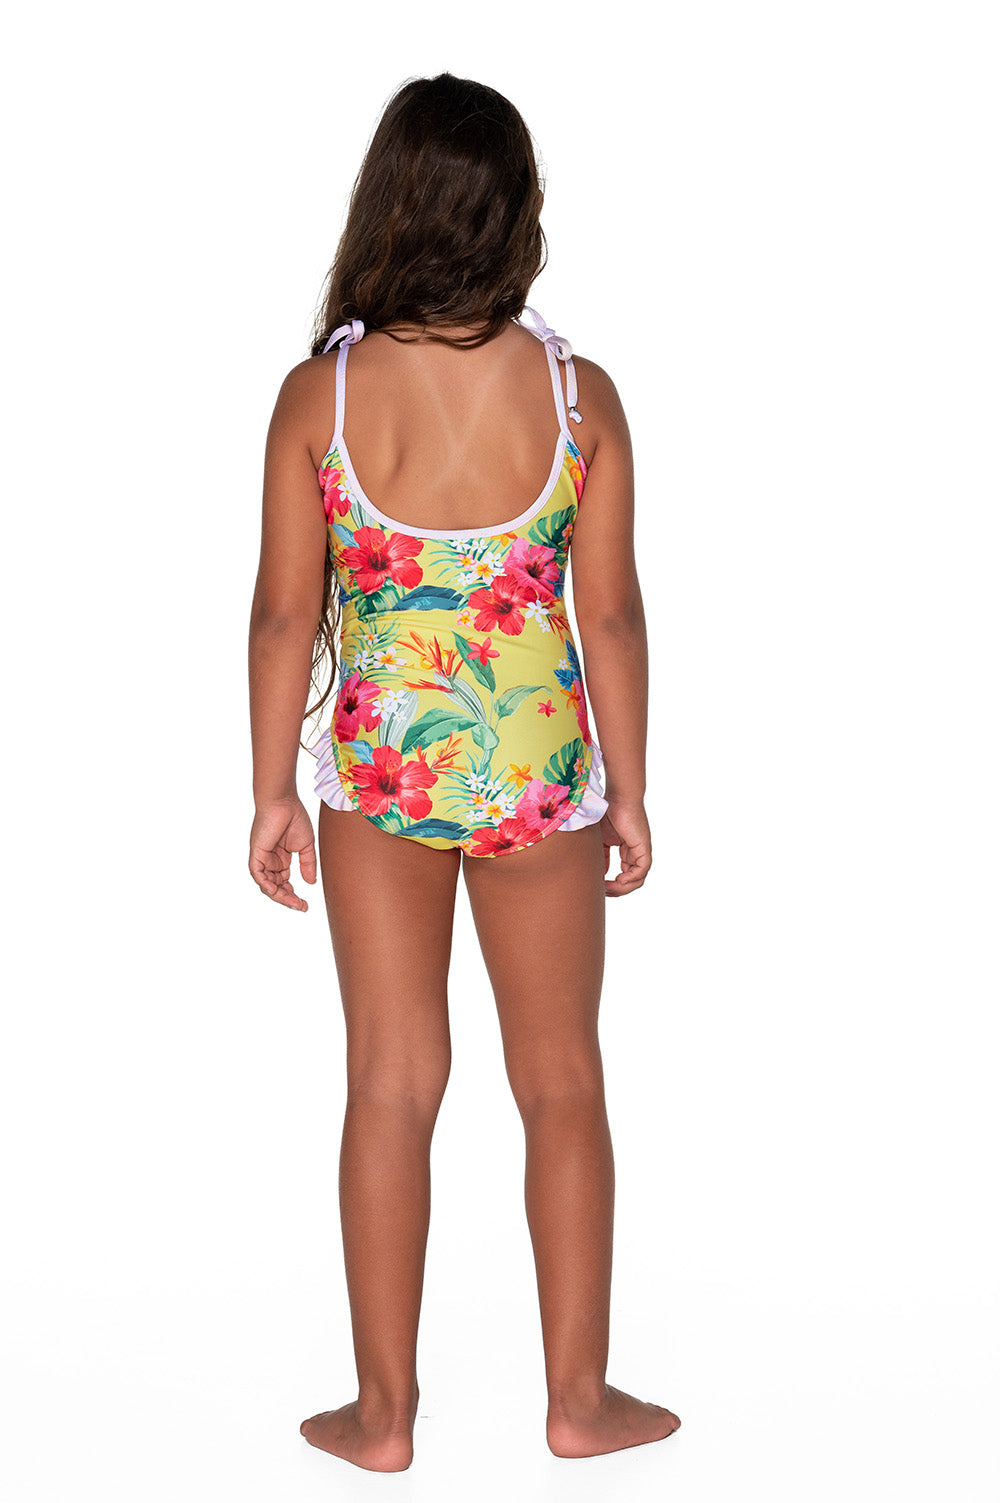 Girls Frilly One Piece Swimsuit - Yellow Hawaiian Floral - Lei - Back